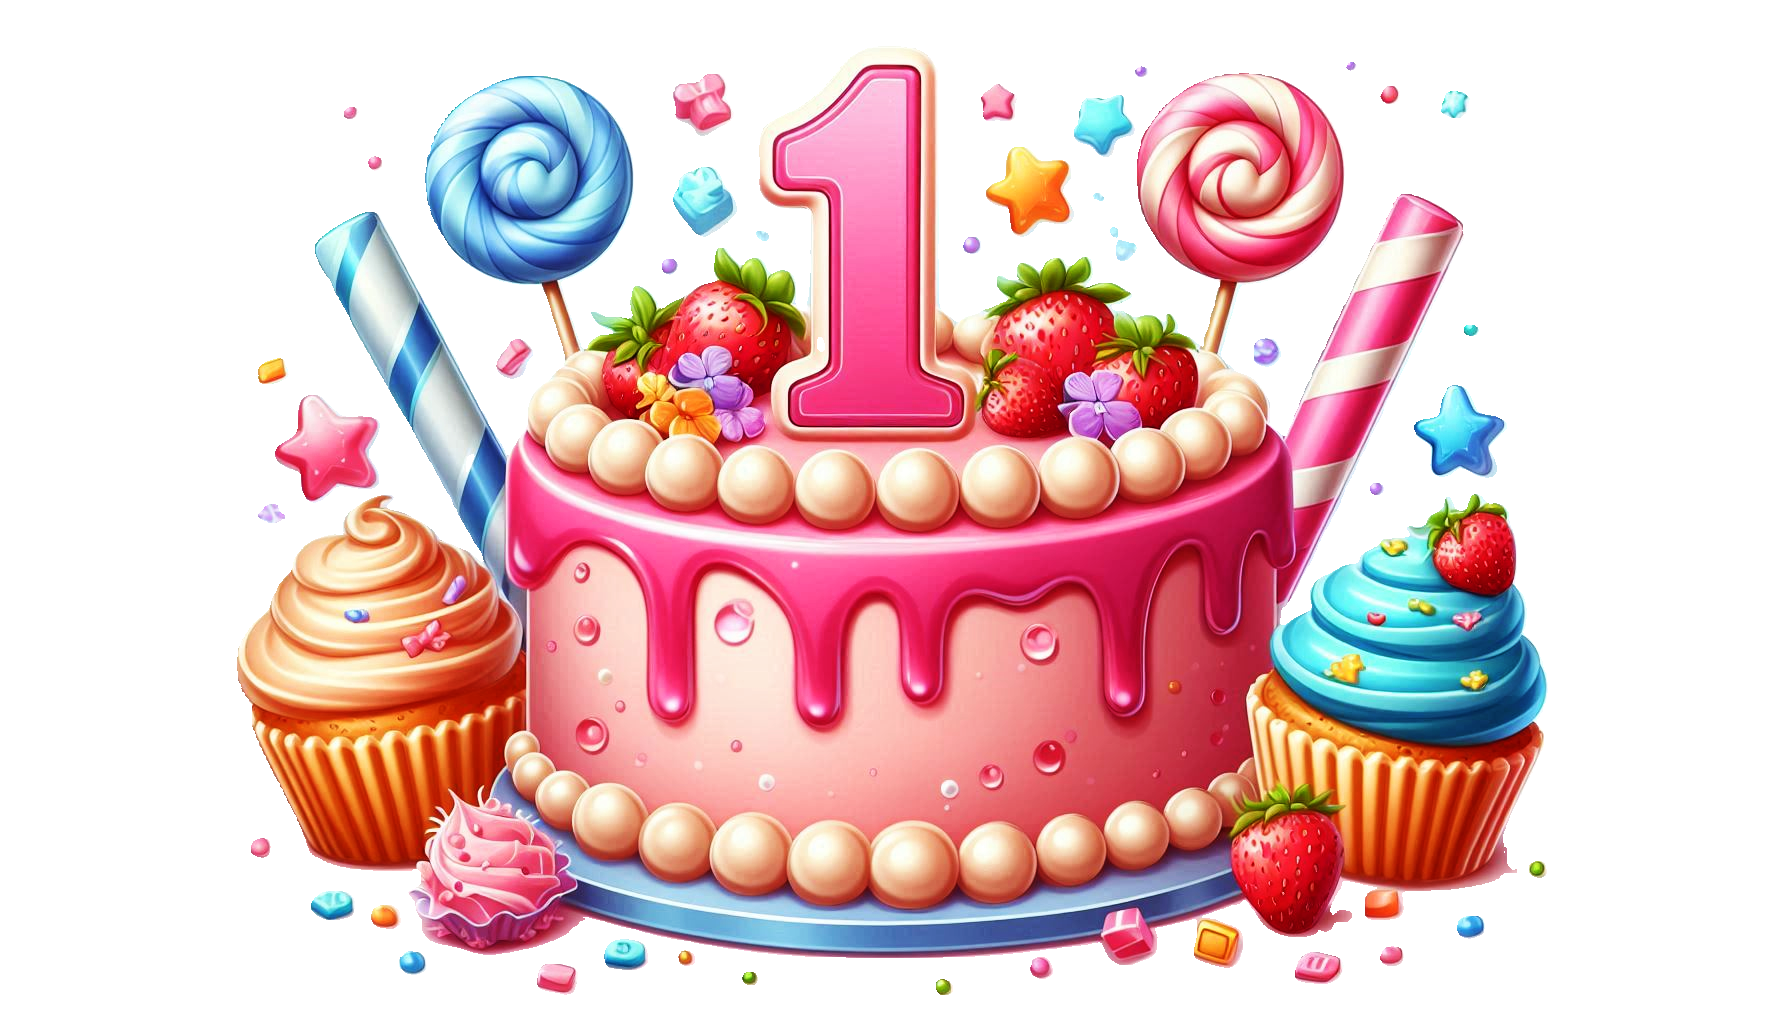 Download Free Beautifull happy birthday cake 1st year chield transparent png cake for Websites, Slideshows, and Designs | Royalty-Free and Unlimited Use.